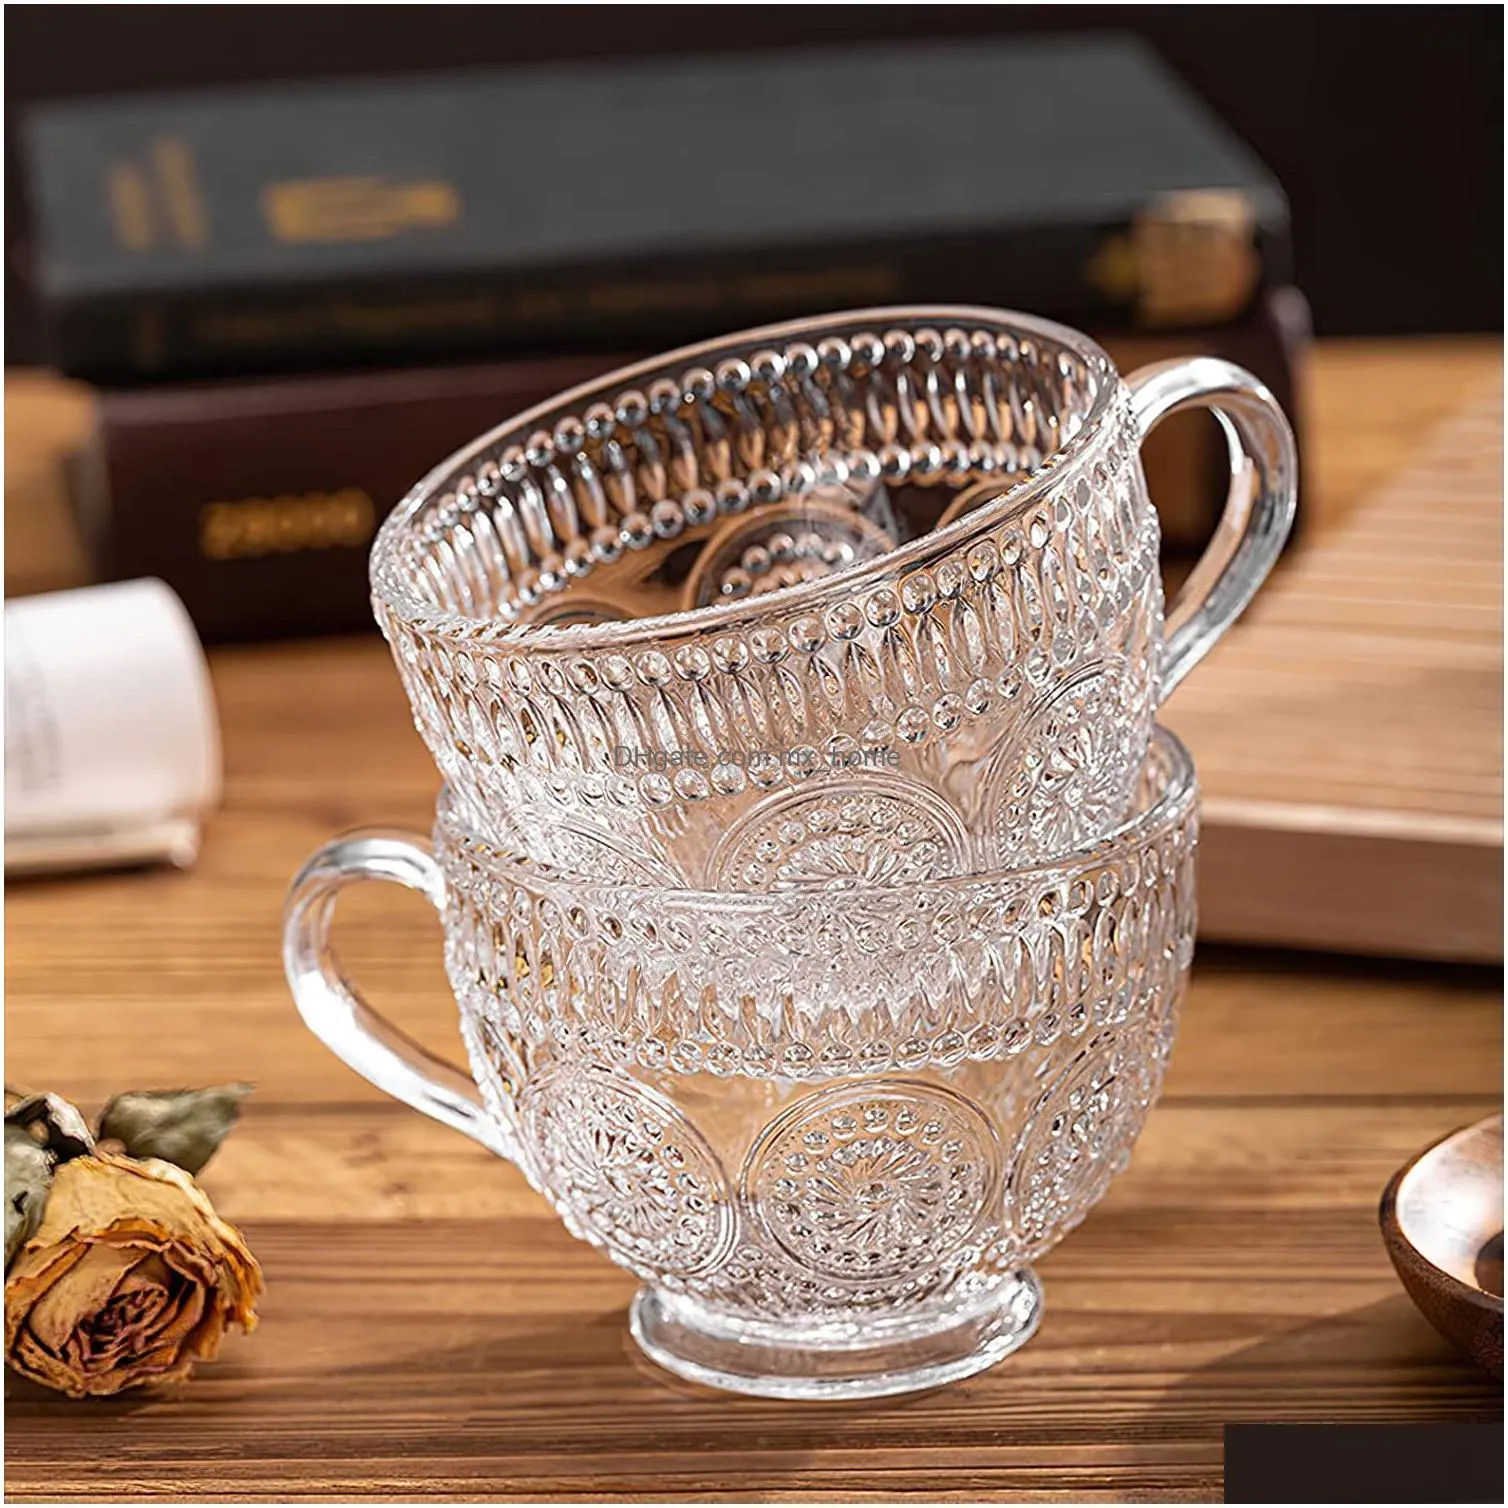 glass coffee mugs with handles embossed tea cups vintage drinking glassware for water milk latte cappuccino dessert beverage